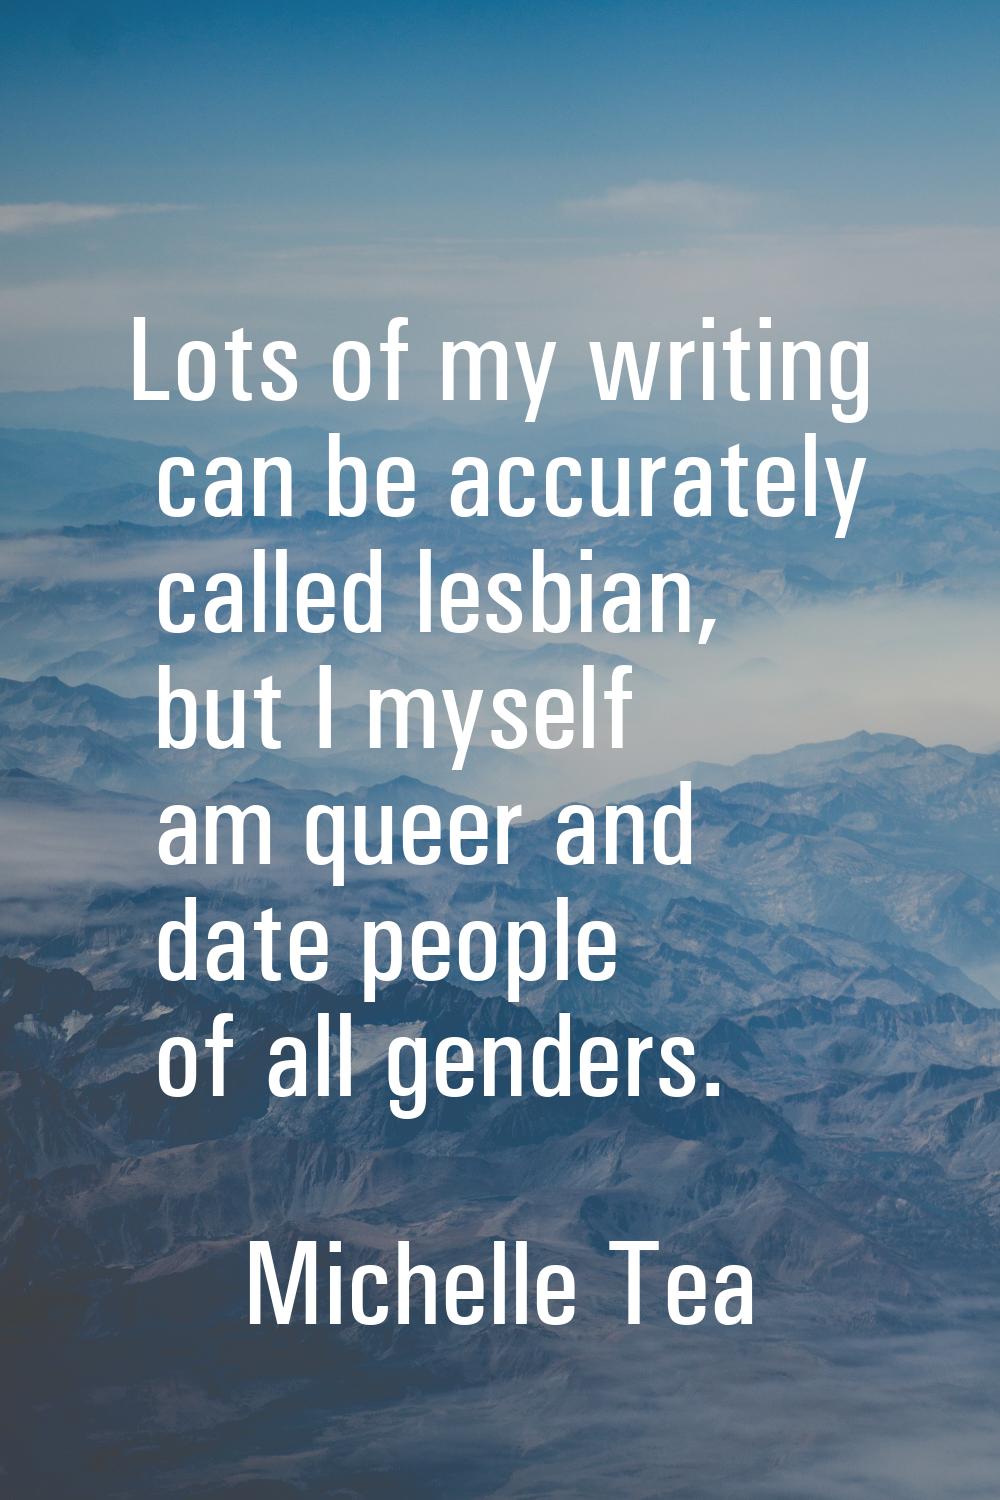 Lots of my writing can be accurately called lesbian, but I myself am queer and date people of all g